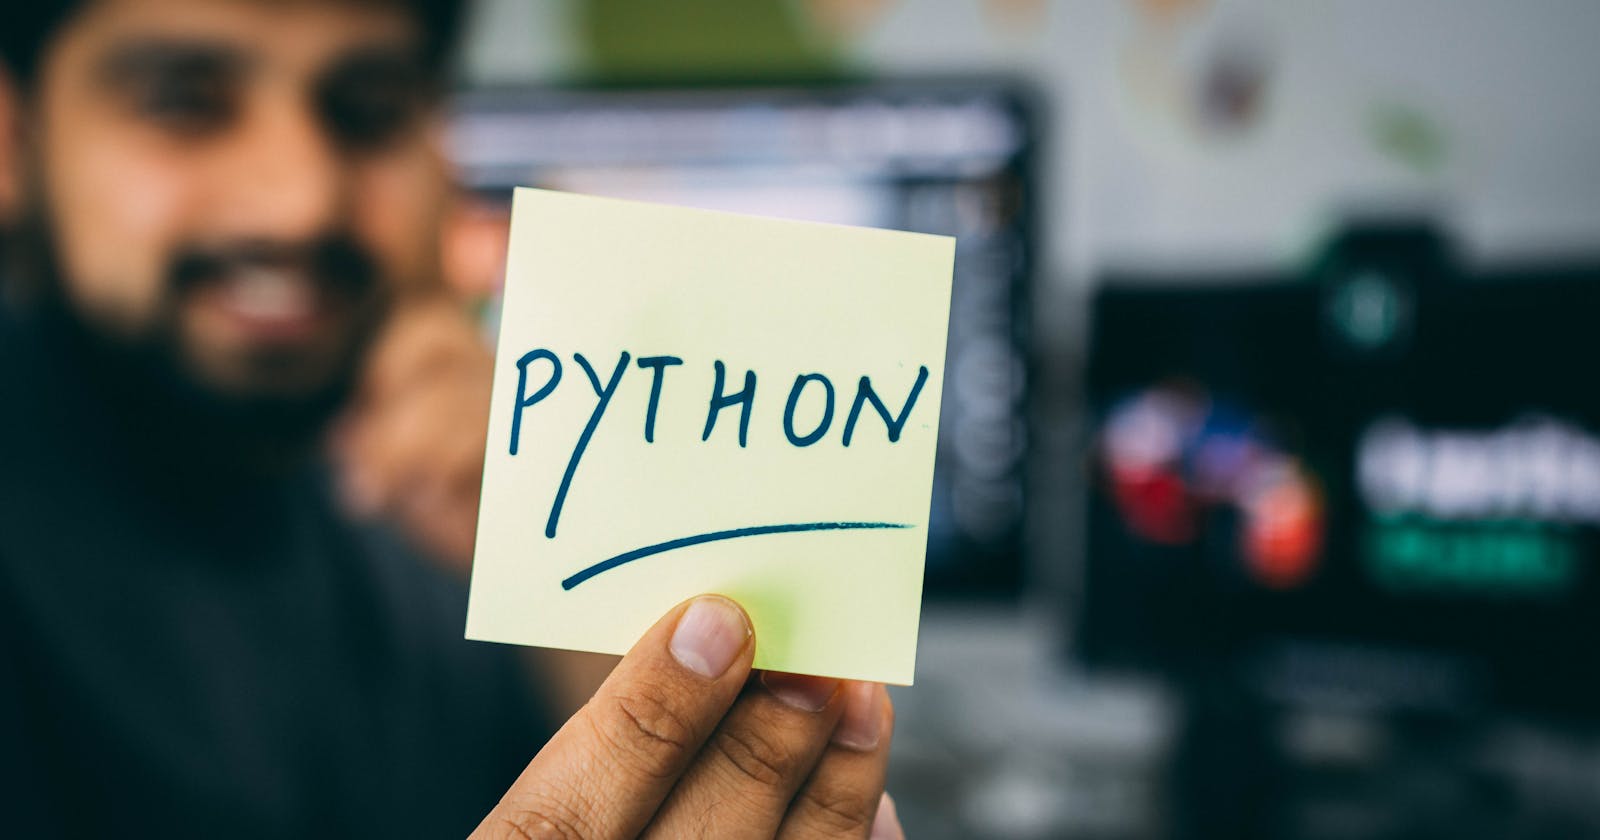 Know more about Python !